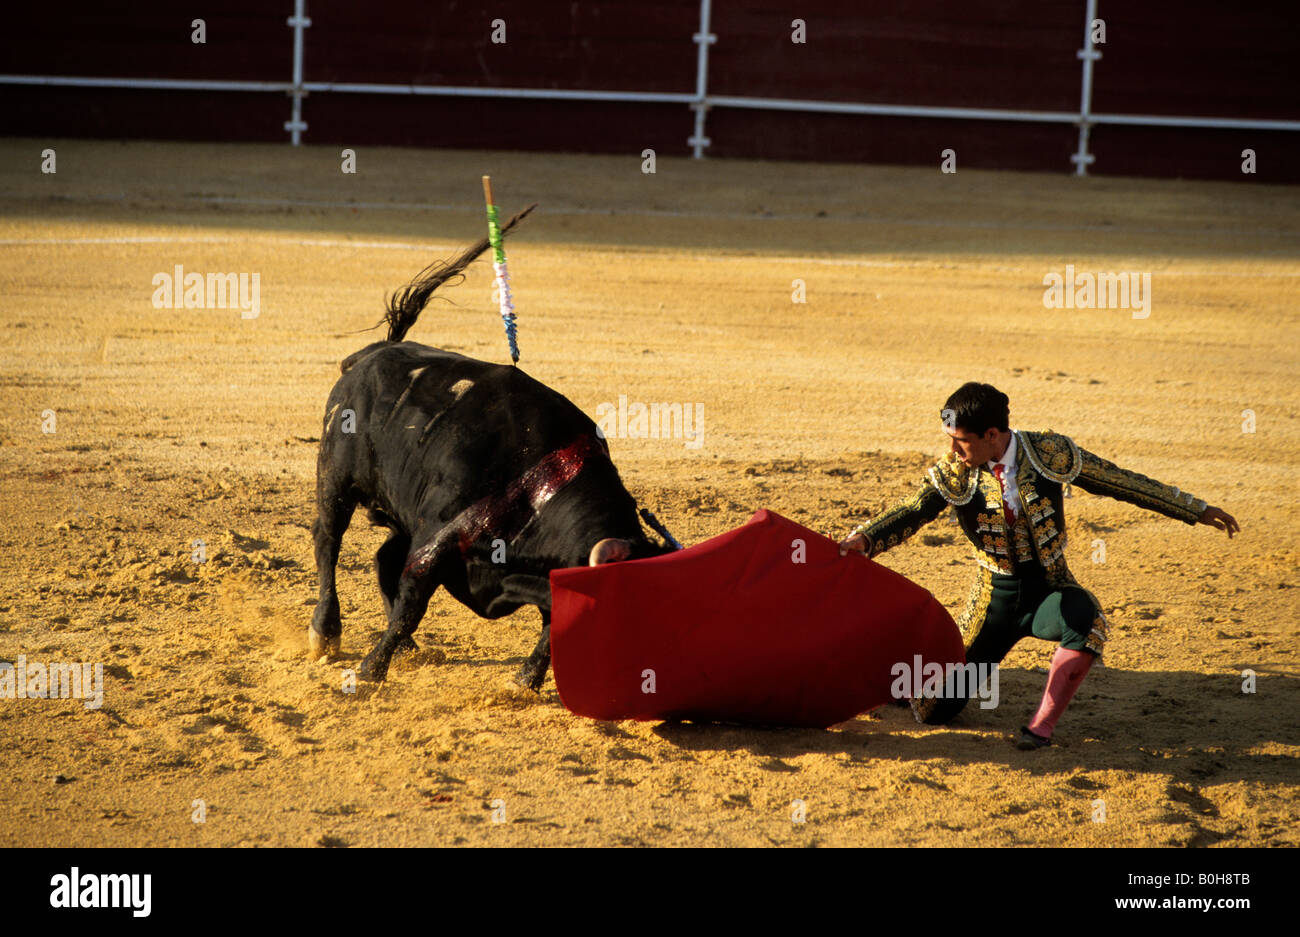 Bloodied black bull, with a banderillas spear protruding from its back, lunging at the red cape held by a bullfighter kneeling  Stock Photo